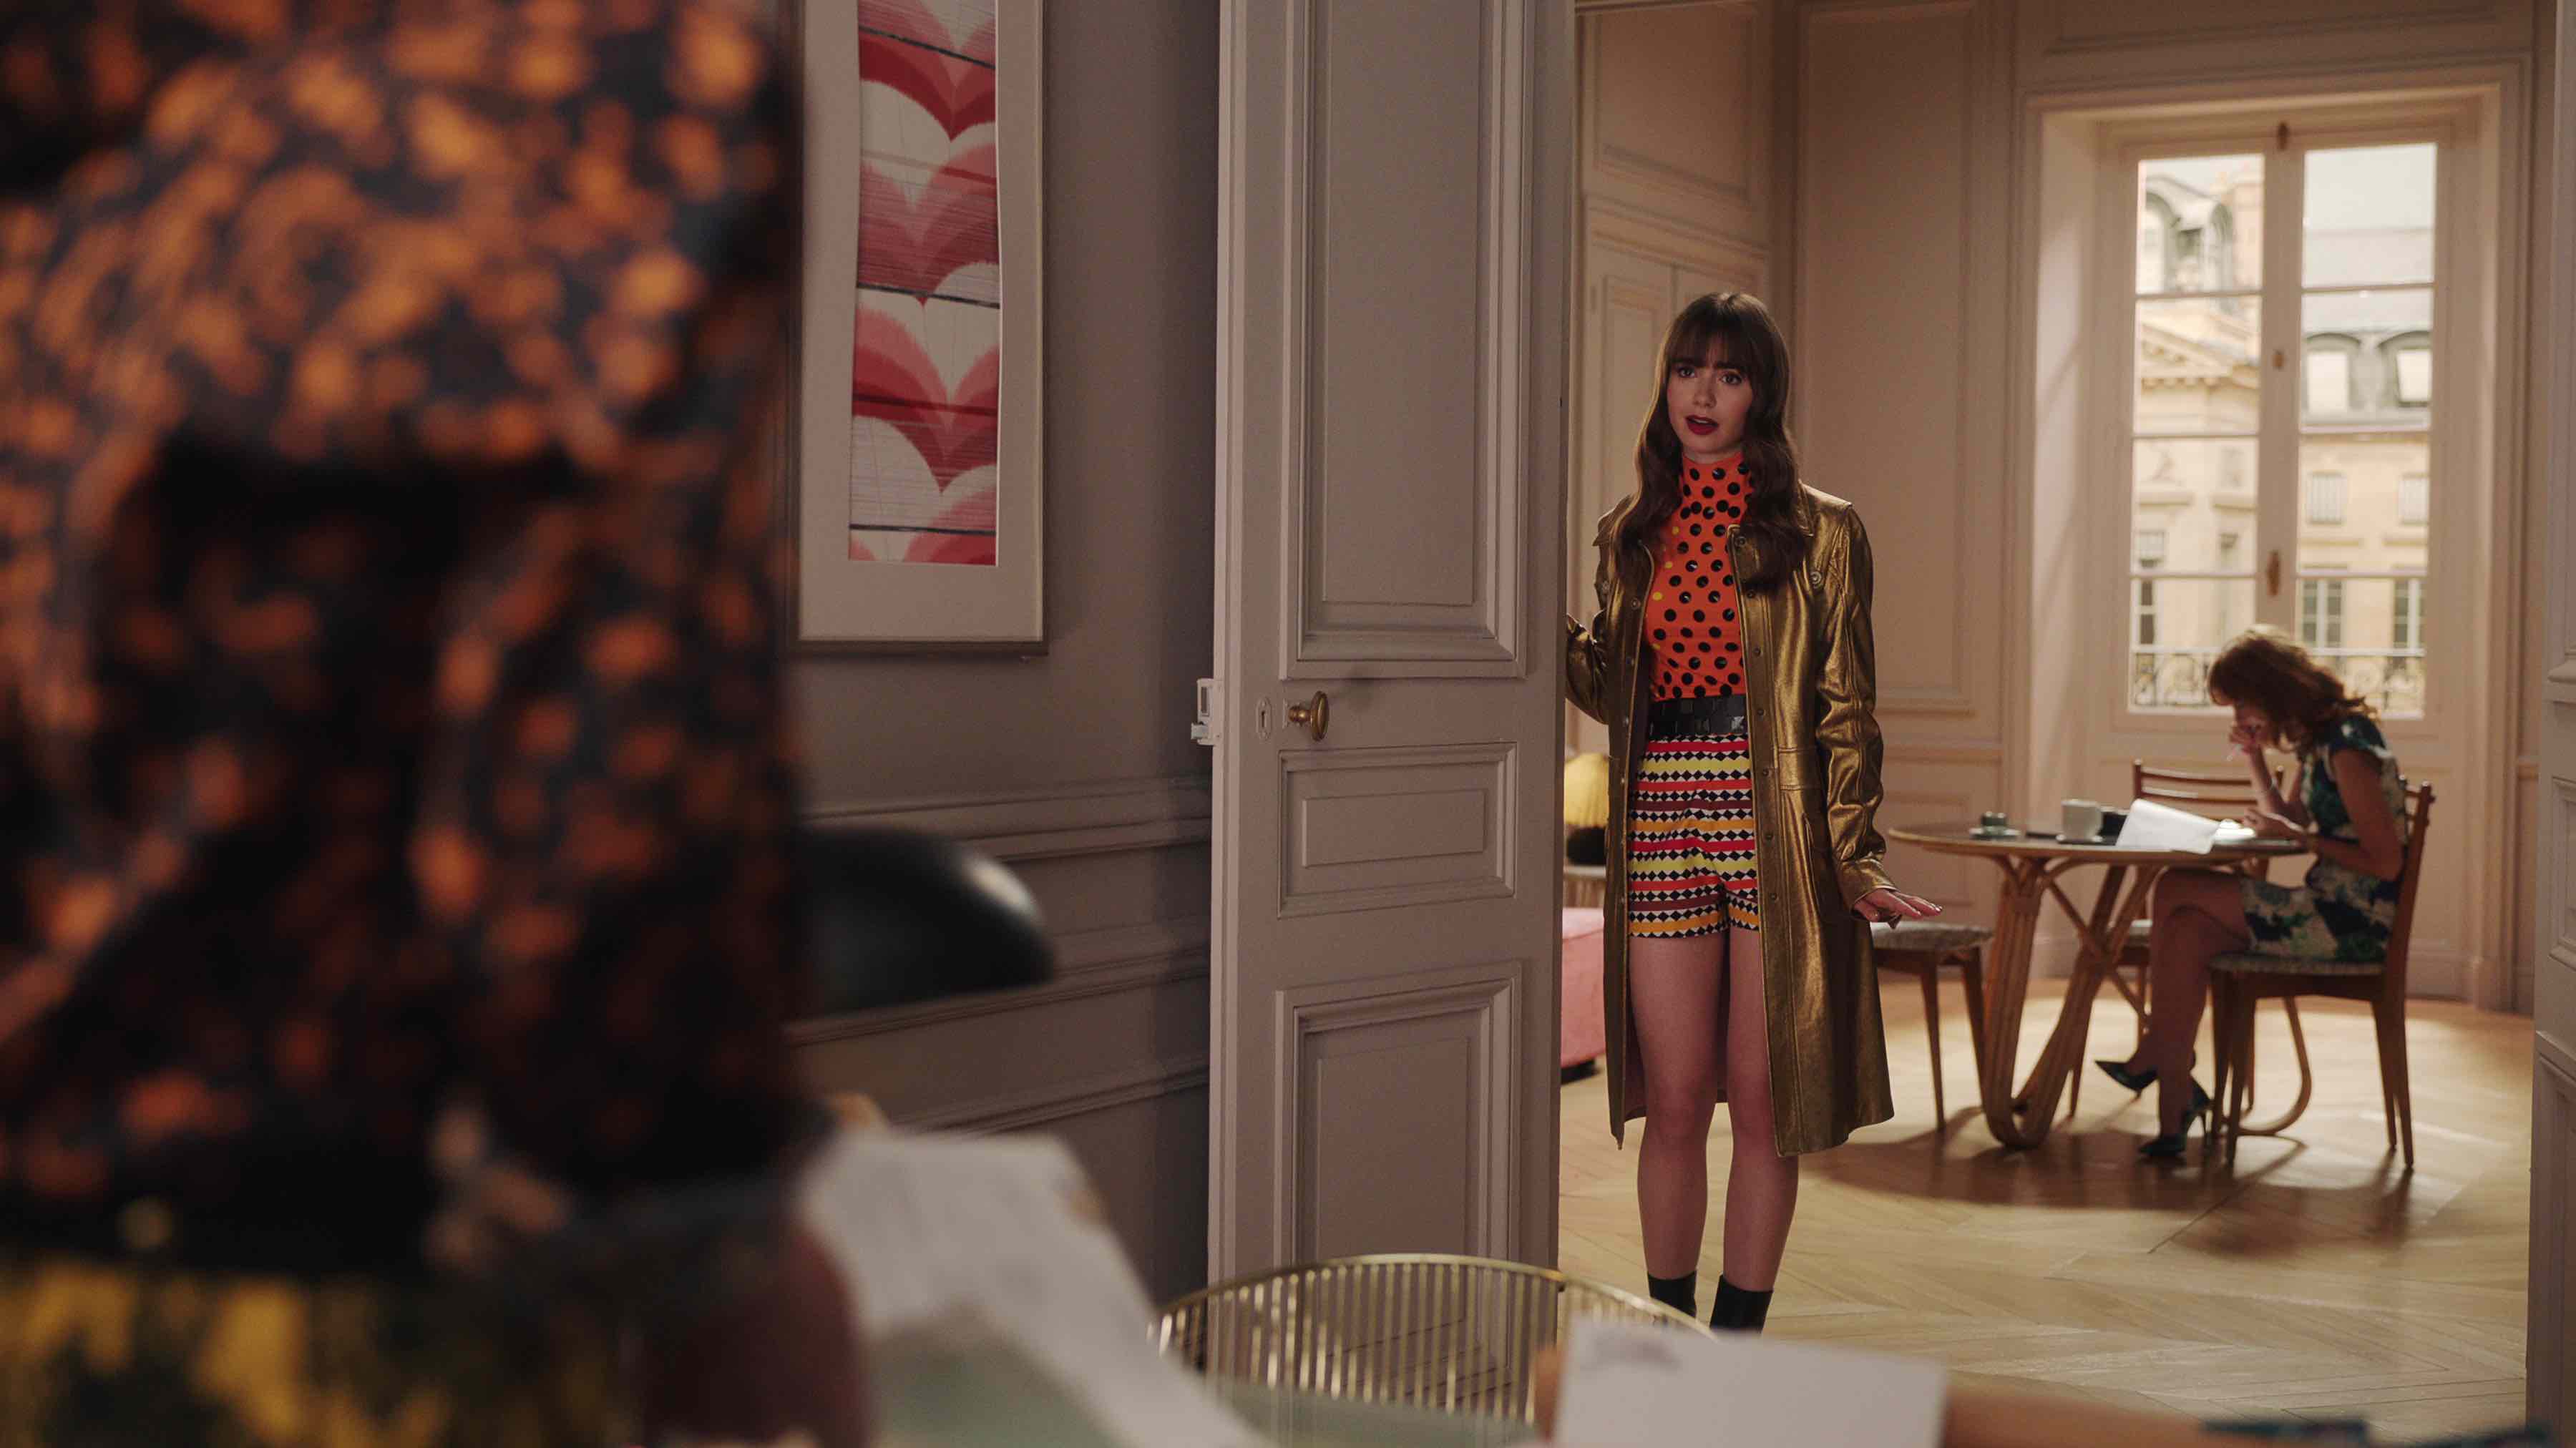 The 'Emily in Paris' Season 3 trailer is fashion-packed